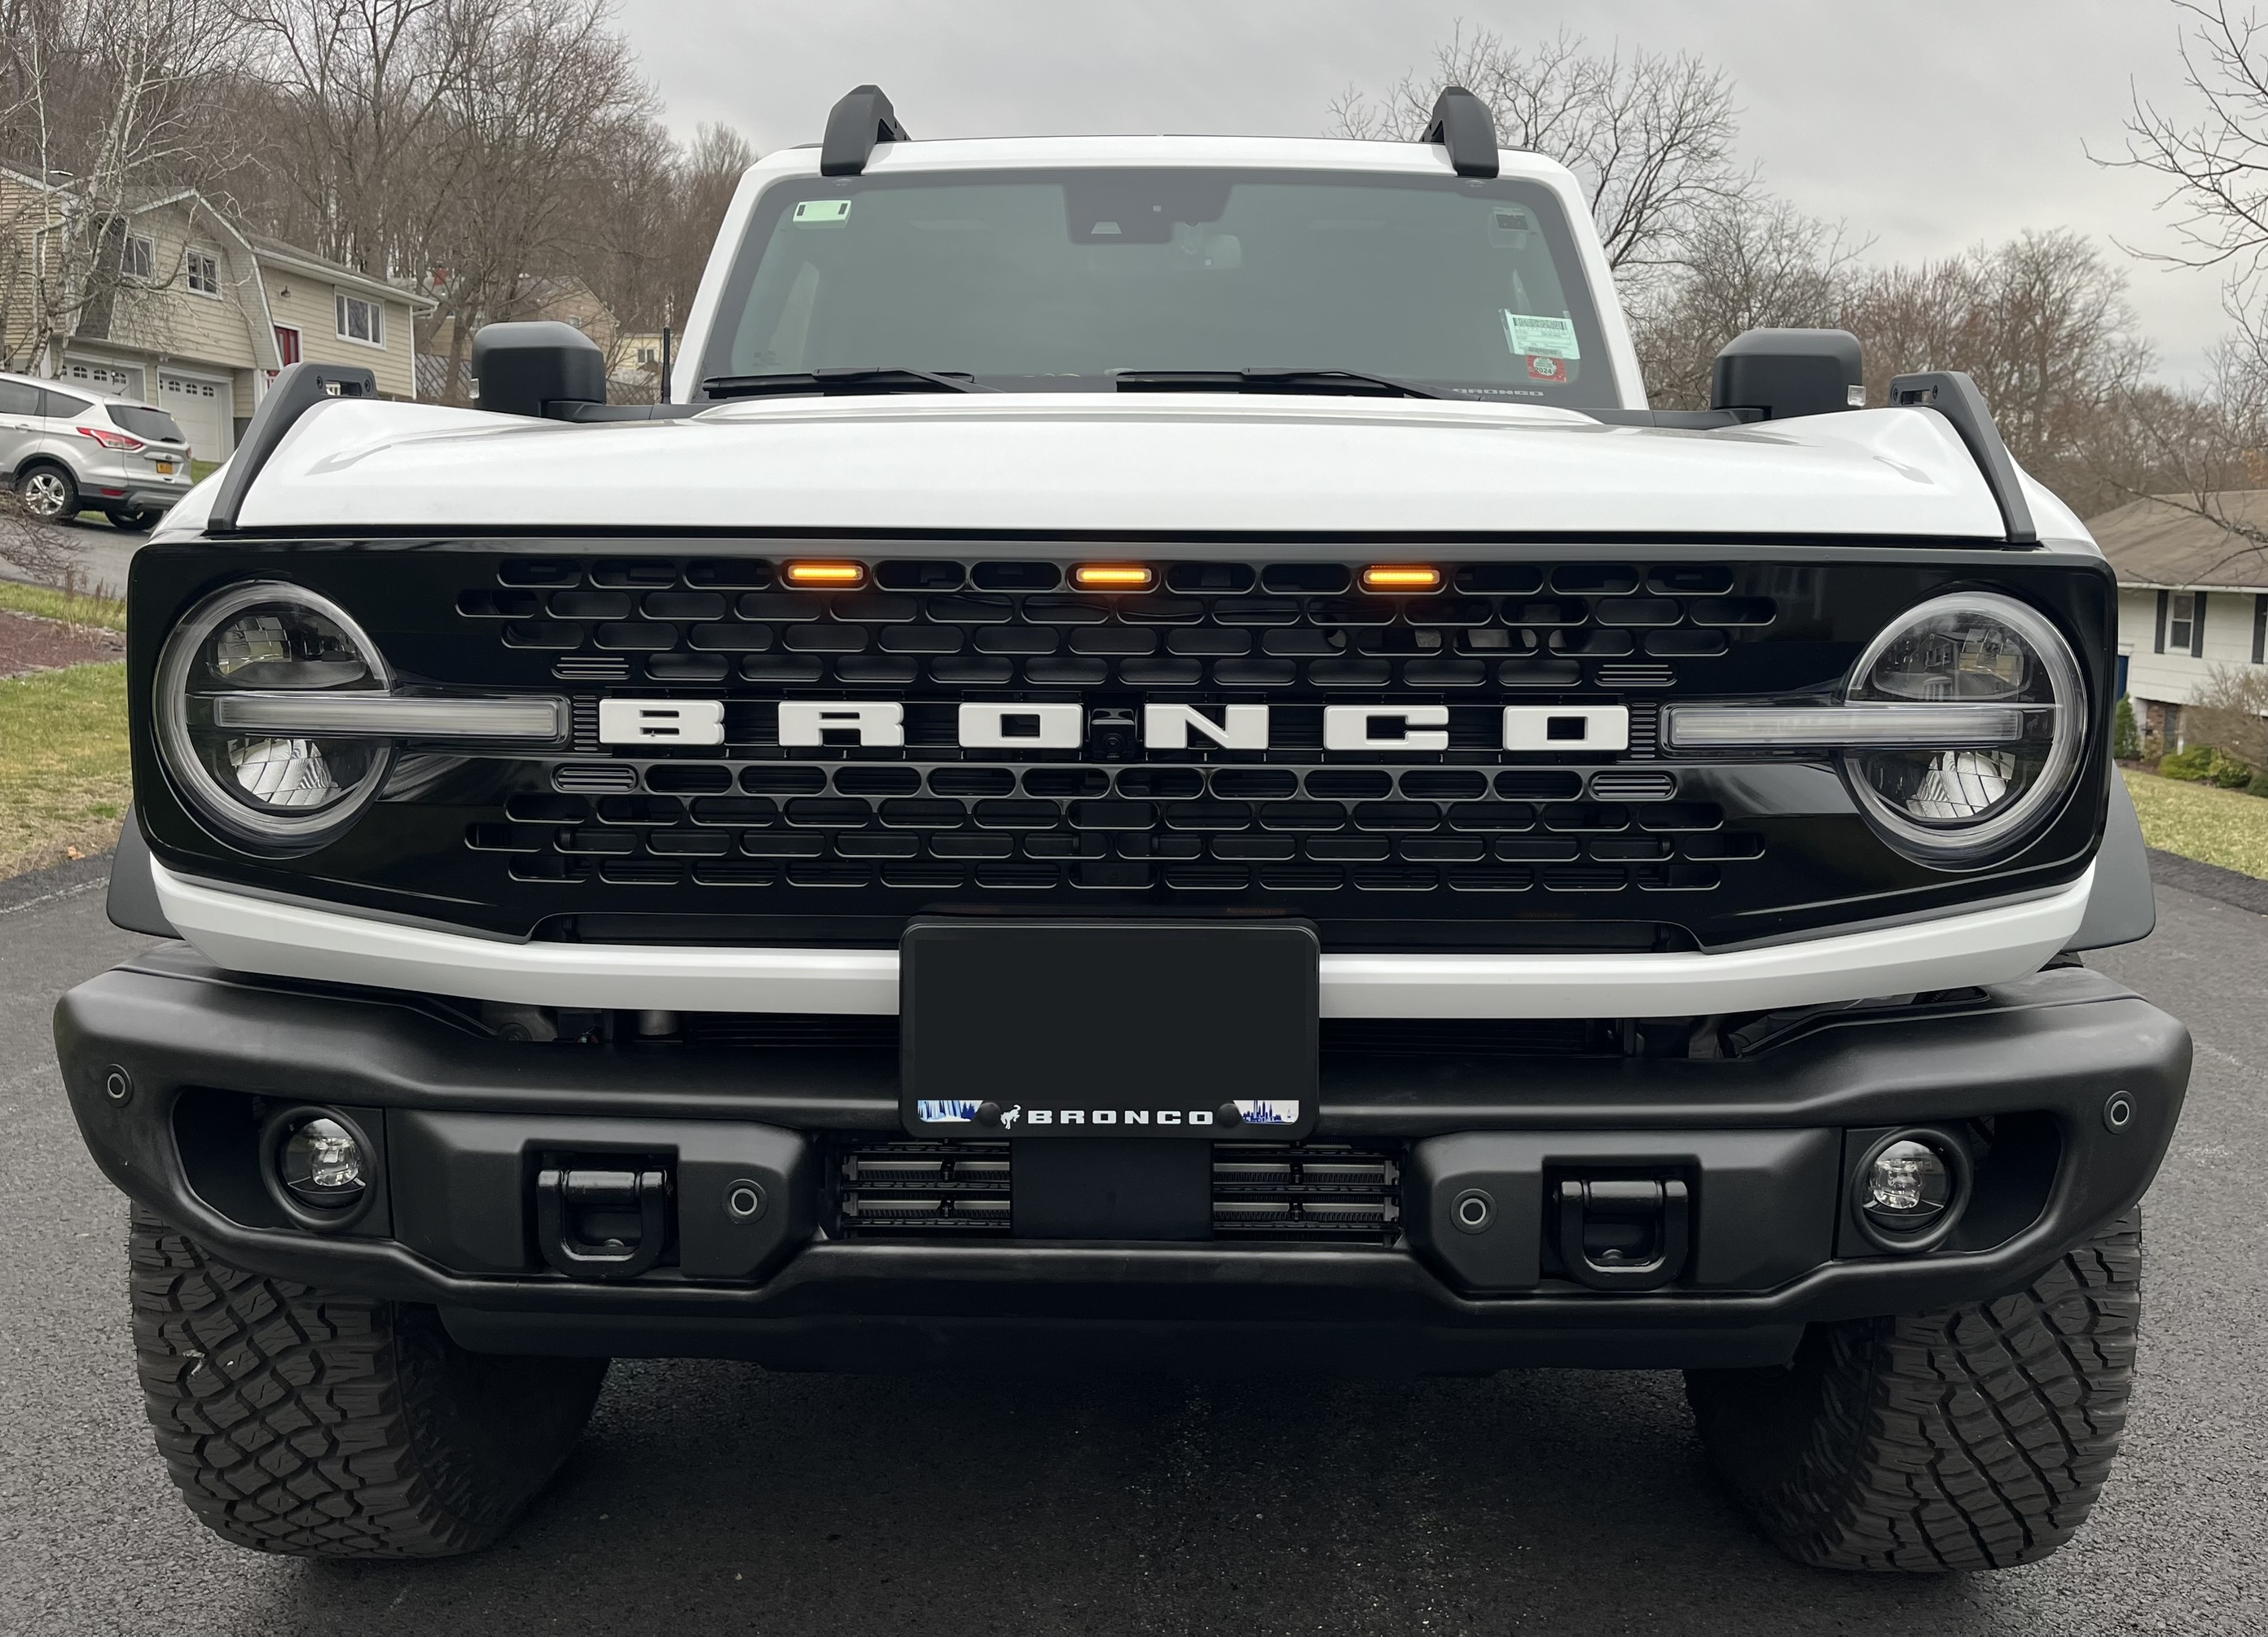 Ford Bronco What did you do TO / WITH your Bronco today? 👨🏻‍🔧🧰🚿🛠 DA151432-D040-4214-9B9D-F6A60C12ED88